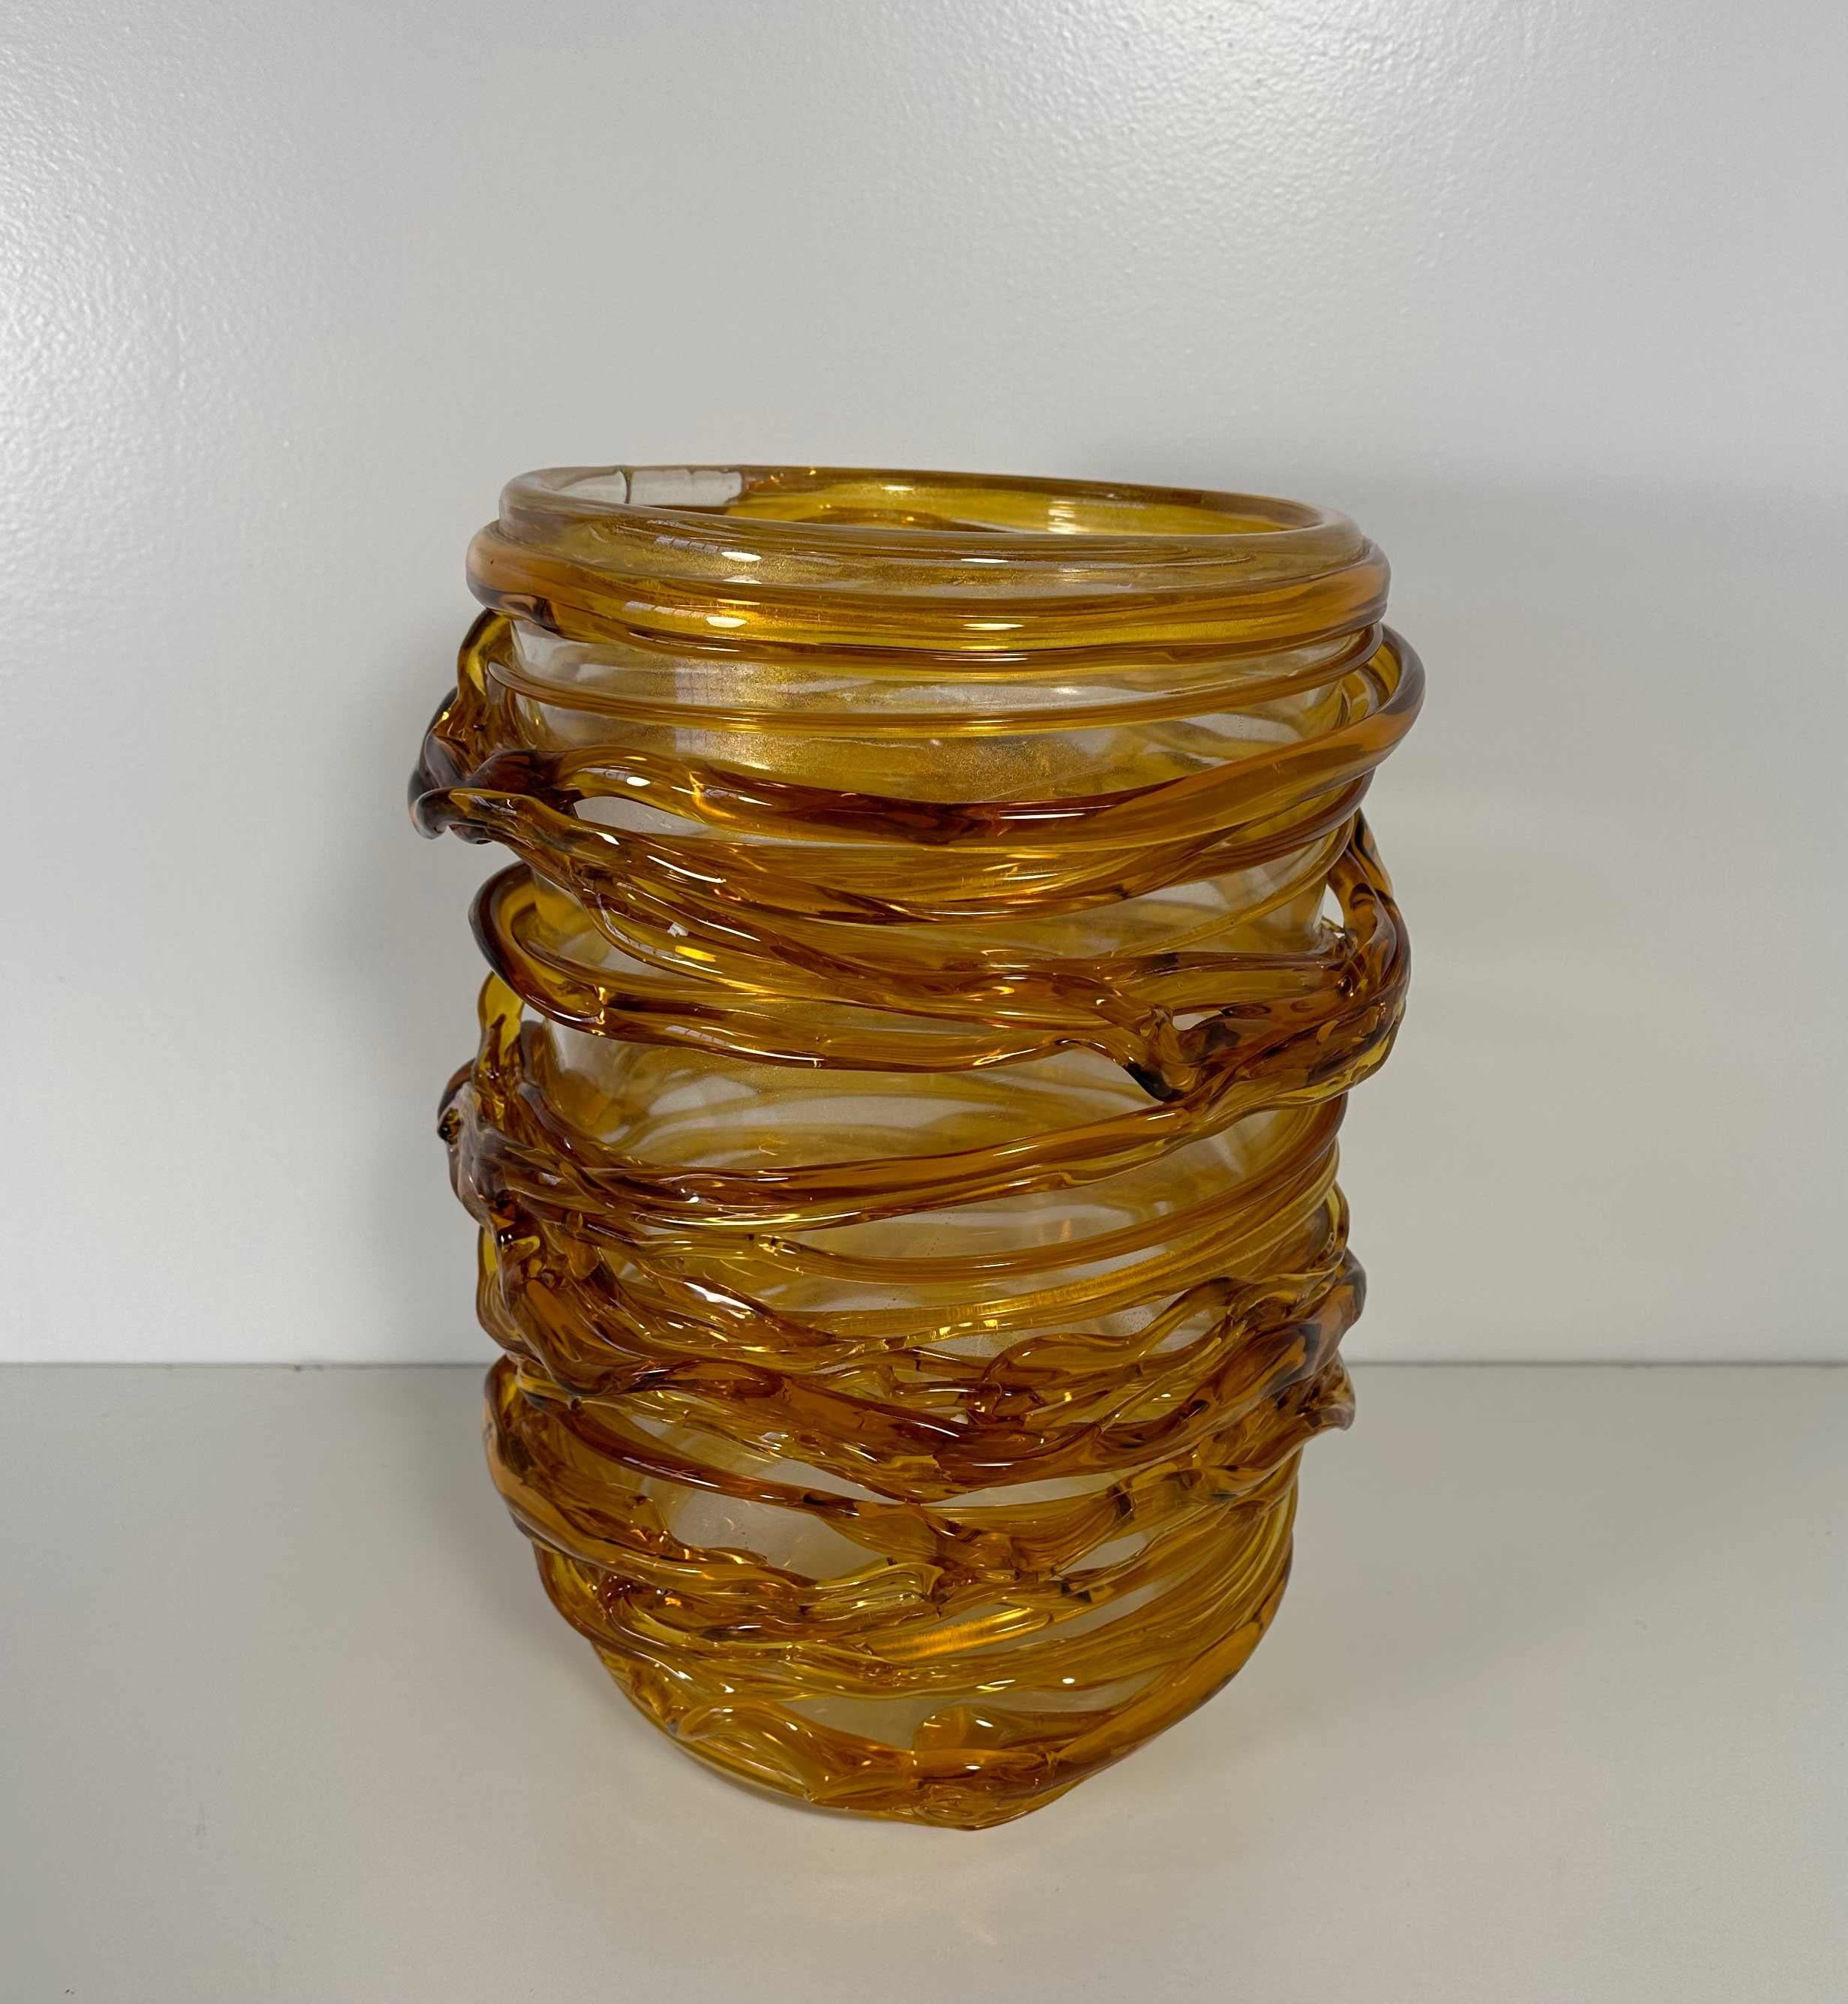 This unique vase was produced in Italy, more precisely in Murano, which is the world's capital of glass art making and crafting. 
It is completely made of amber colored Murano glass, which has been particularly and finely crafted to create